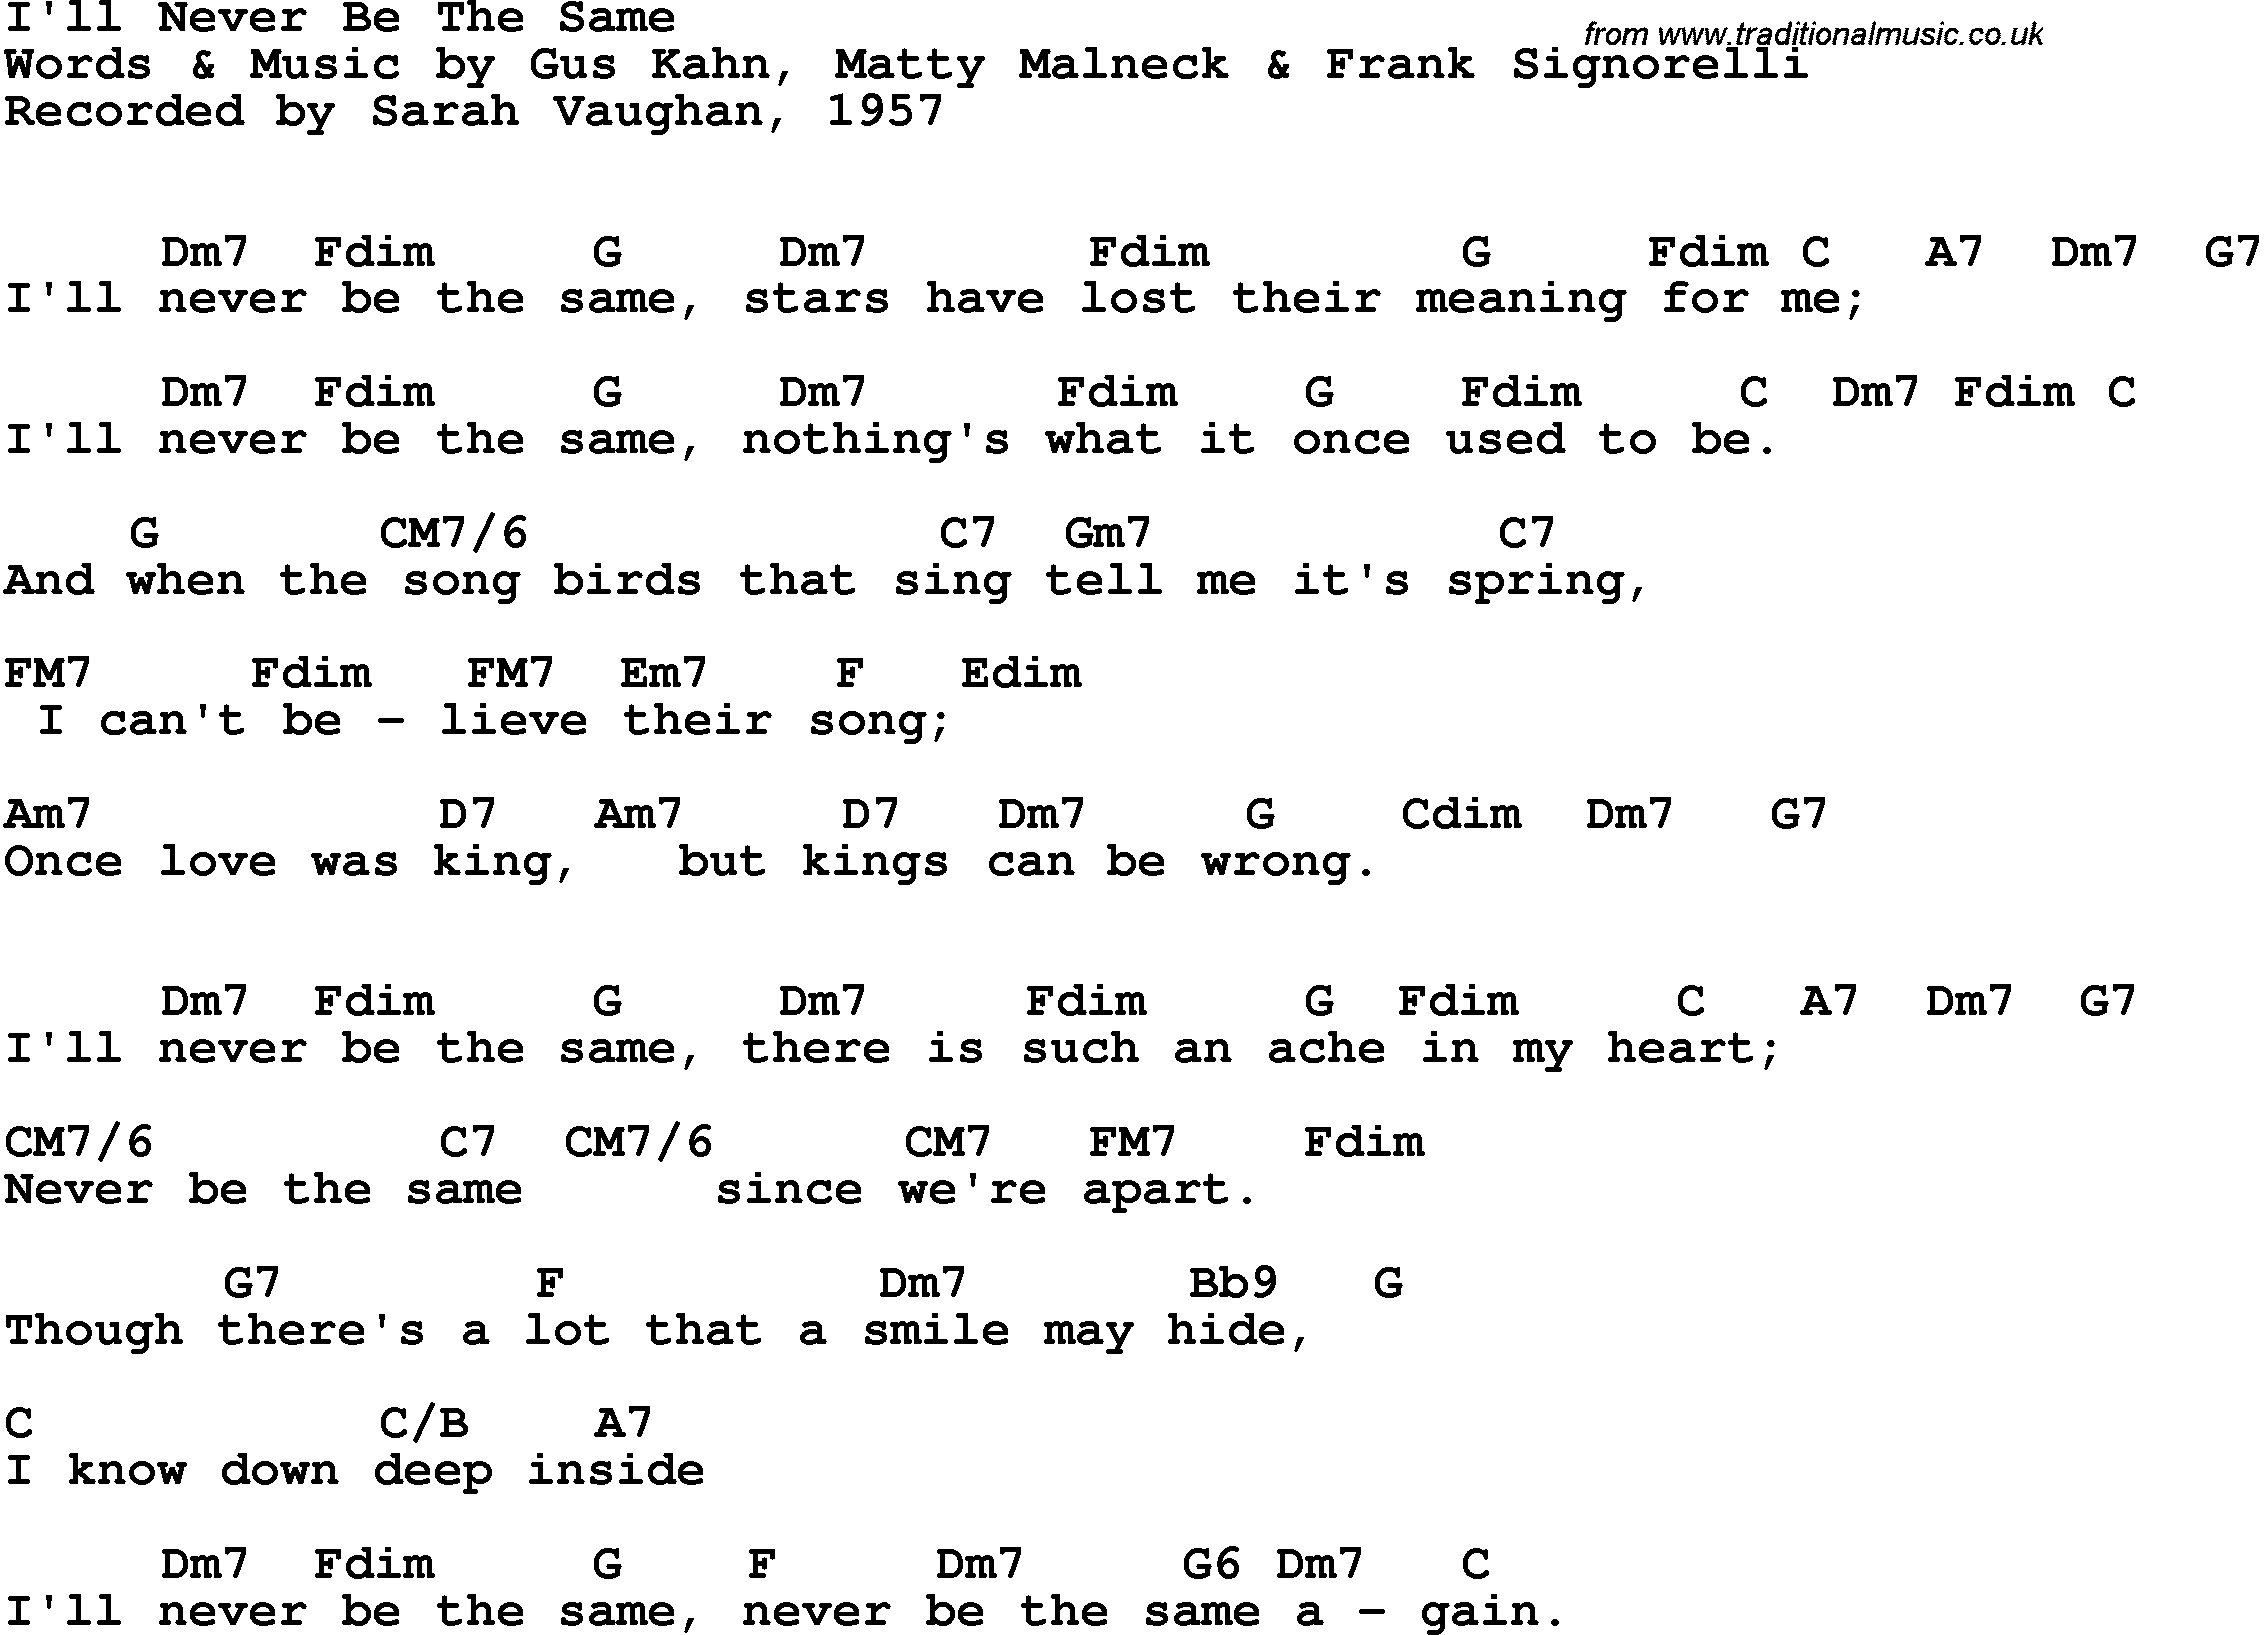 Song Lyrics with guitar chords for I'll Never Be The Same - Sarah Vaughan, 1957